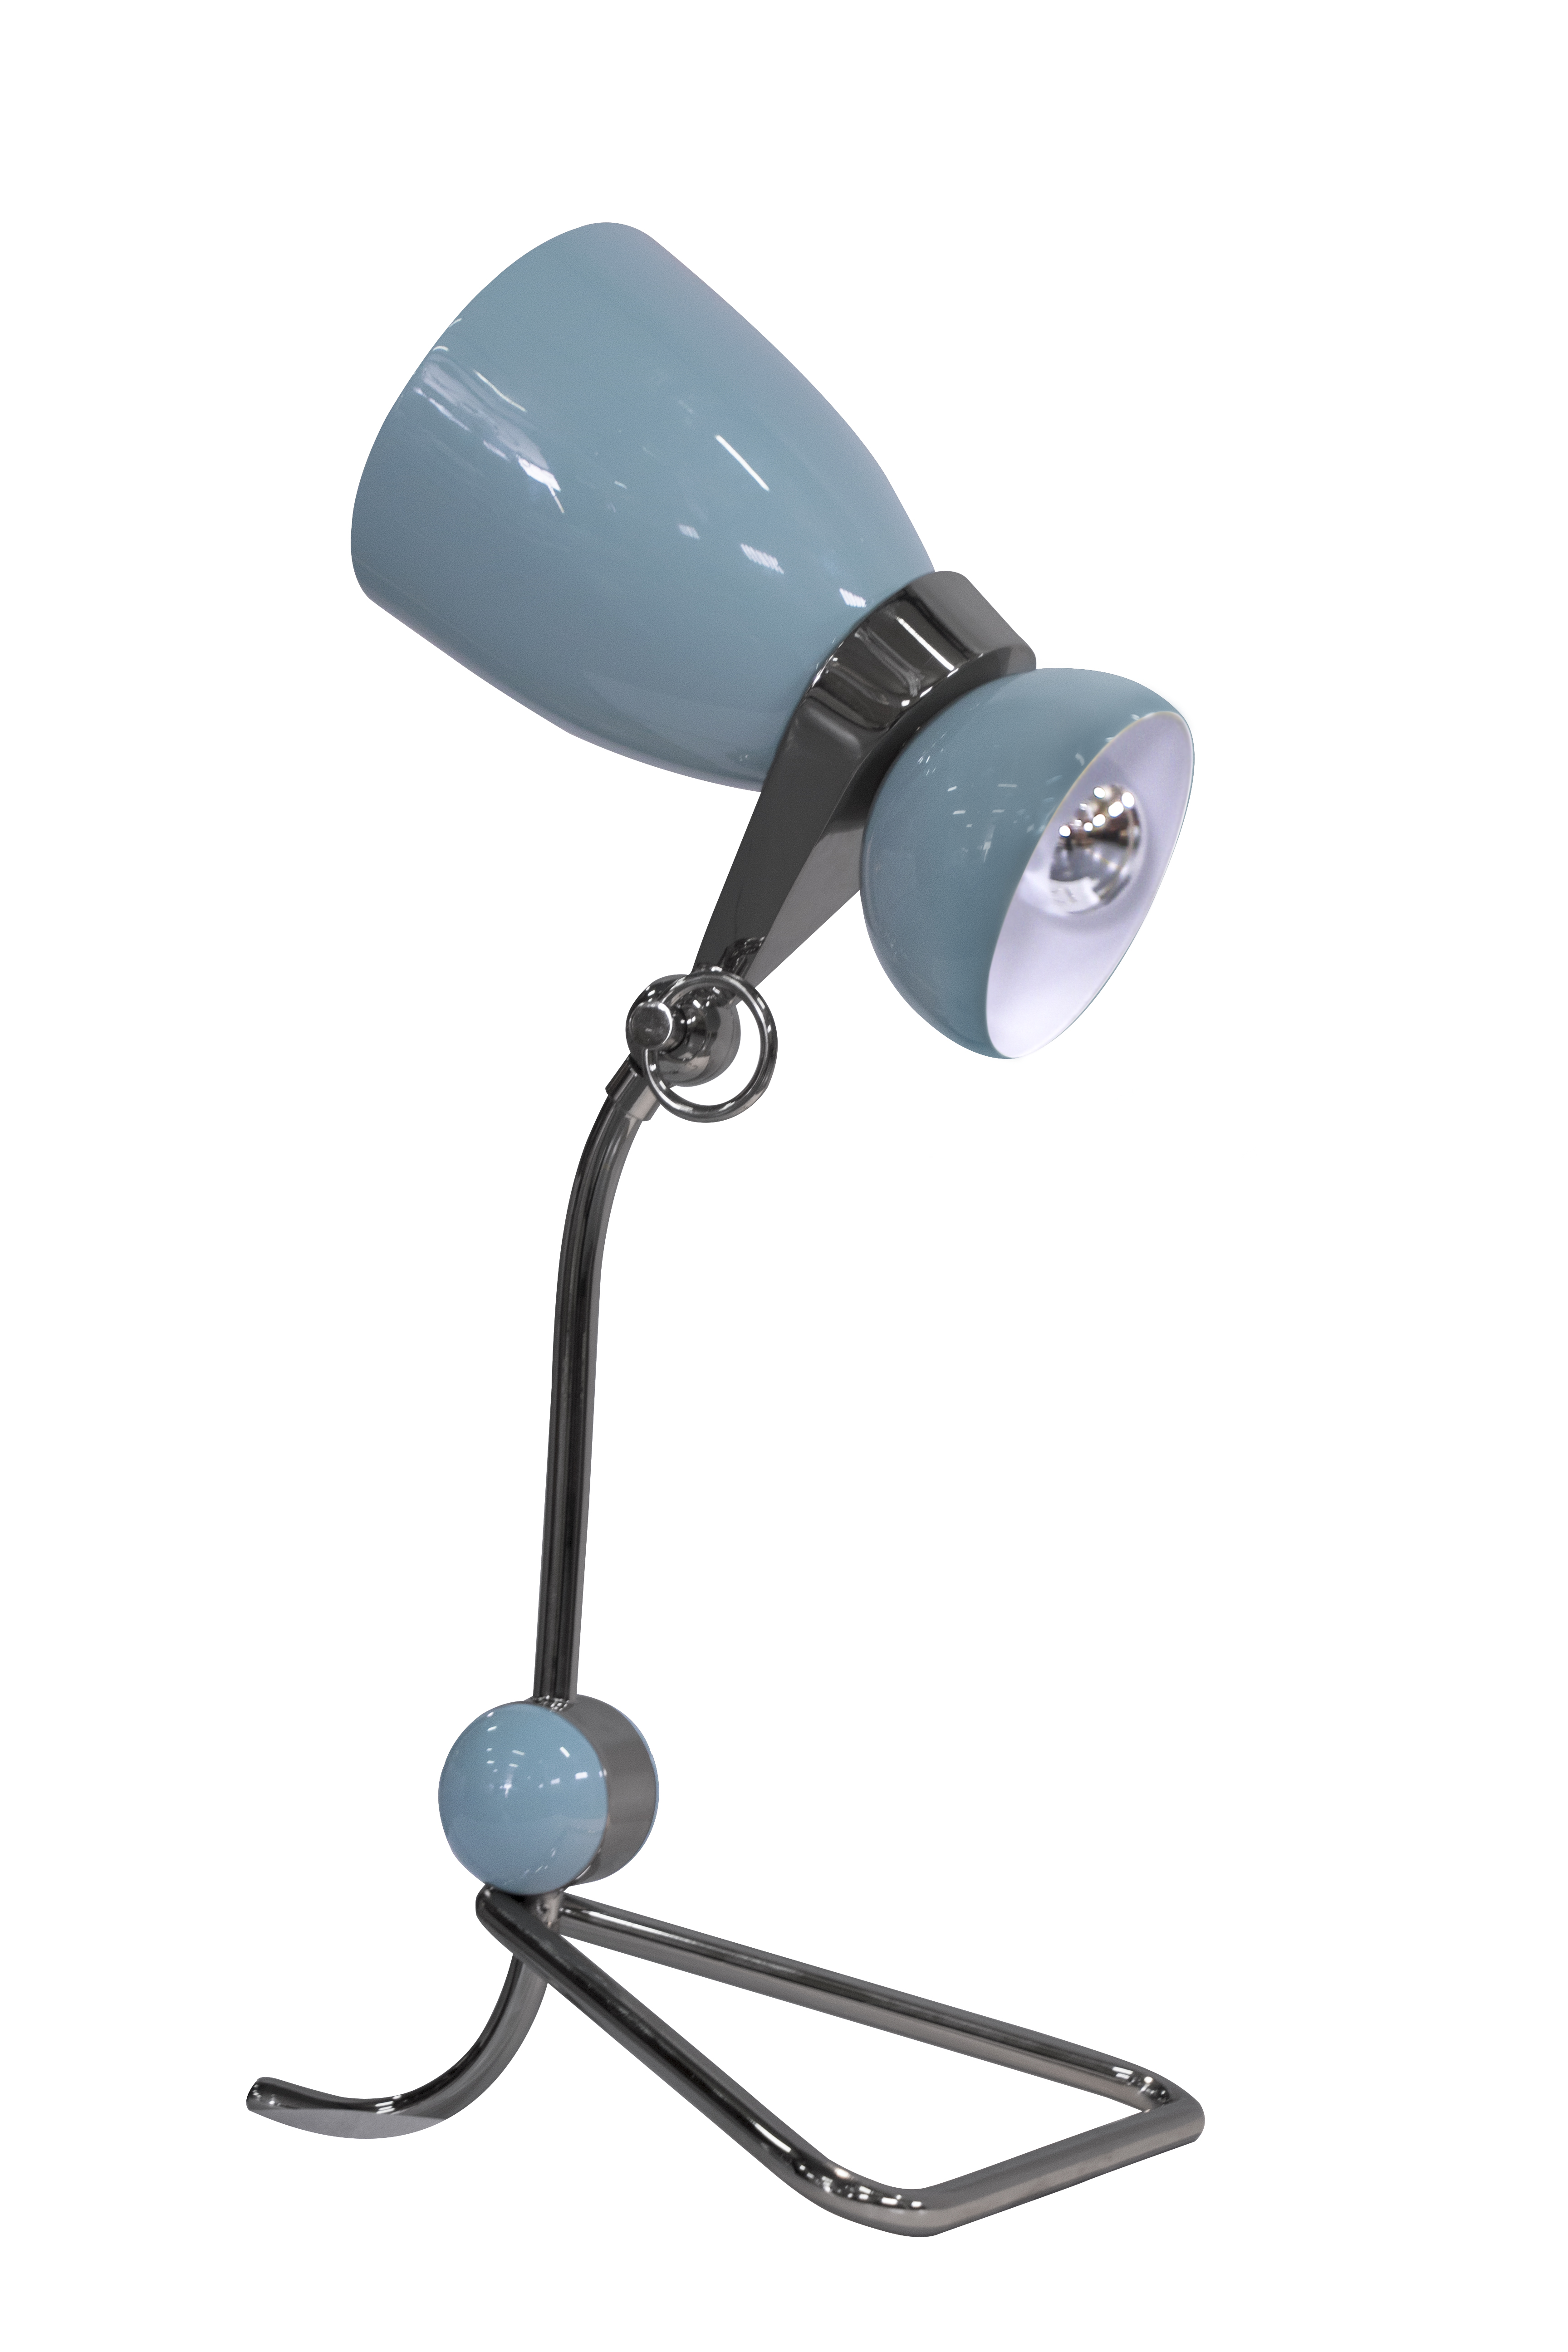 Contemporary Lamp Ideas- Boost Your Home Decor with This Desk Lamp